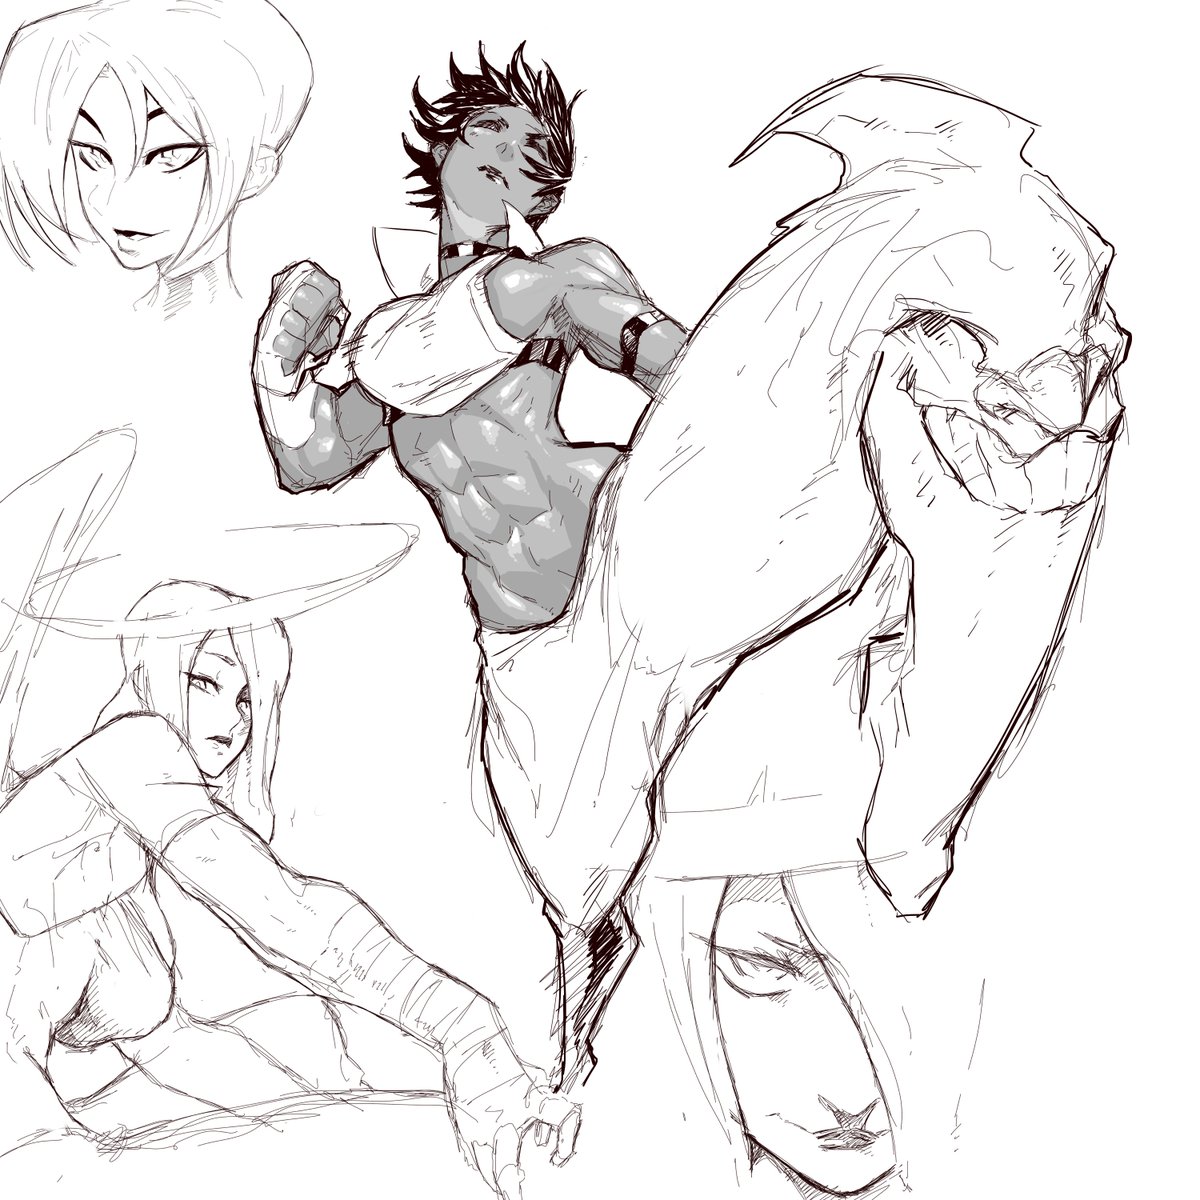 Some of my favorite sketches on this computer (excluding Juri because she'd make up the majority of the list XD) 